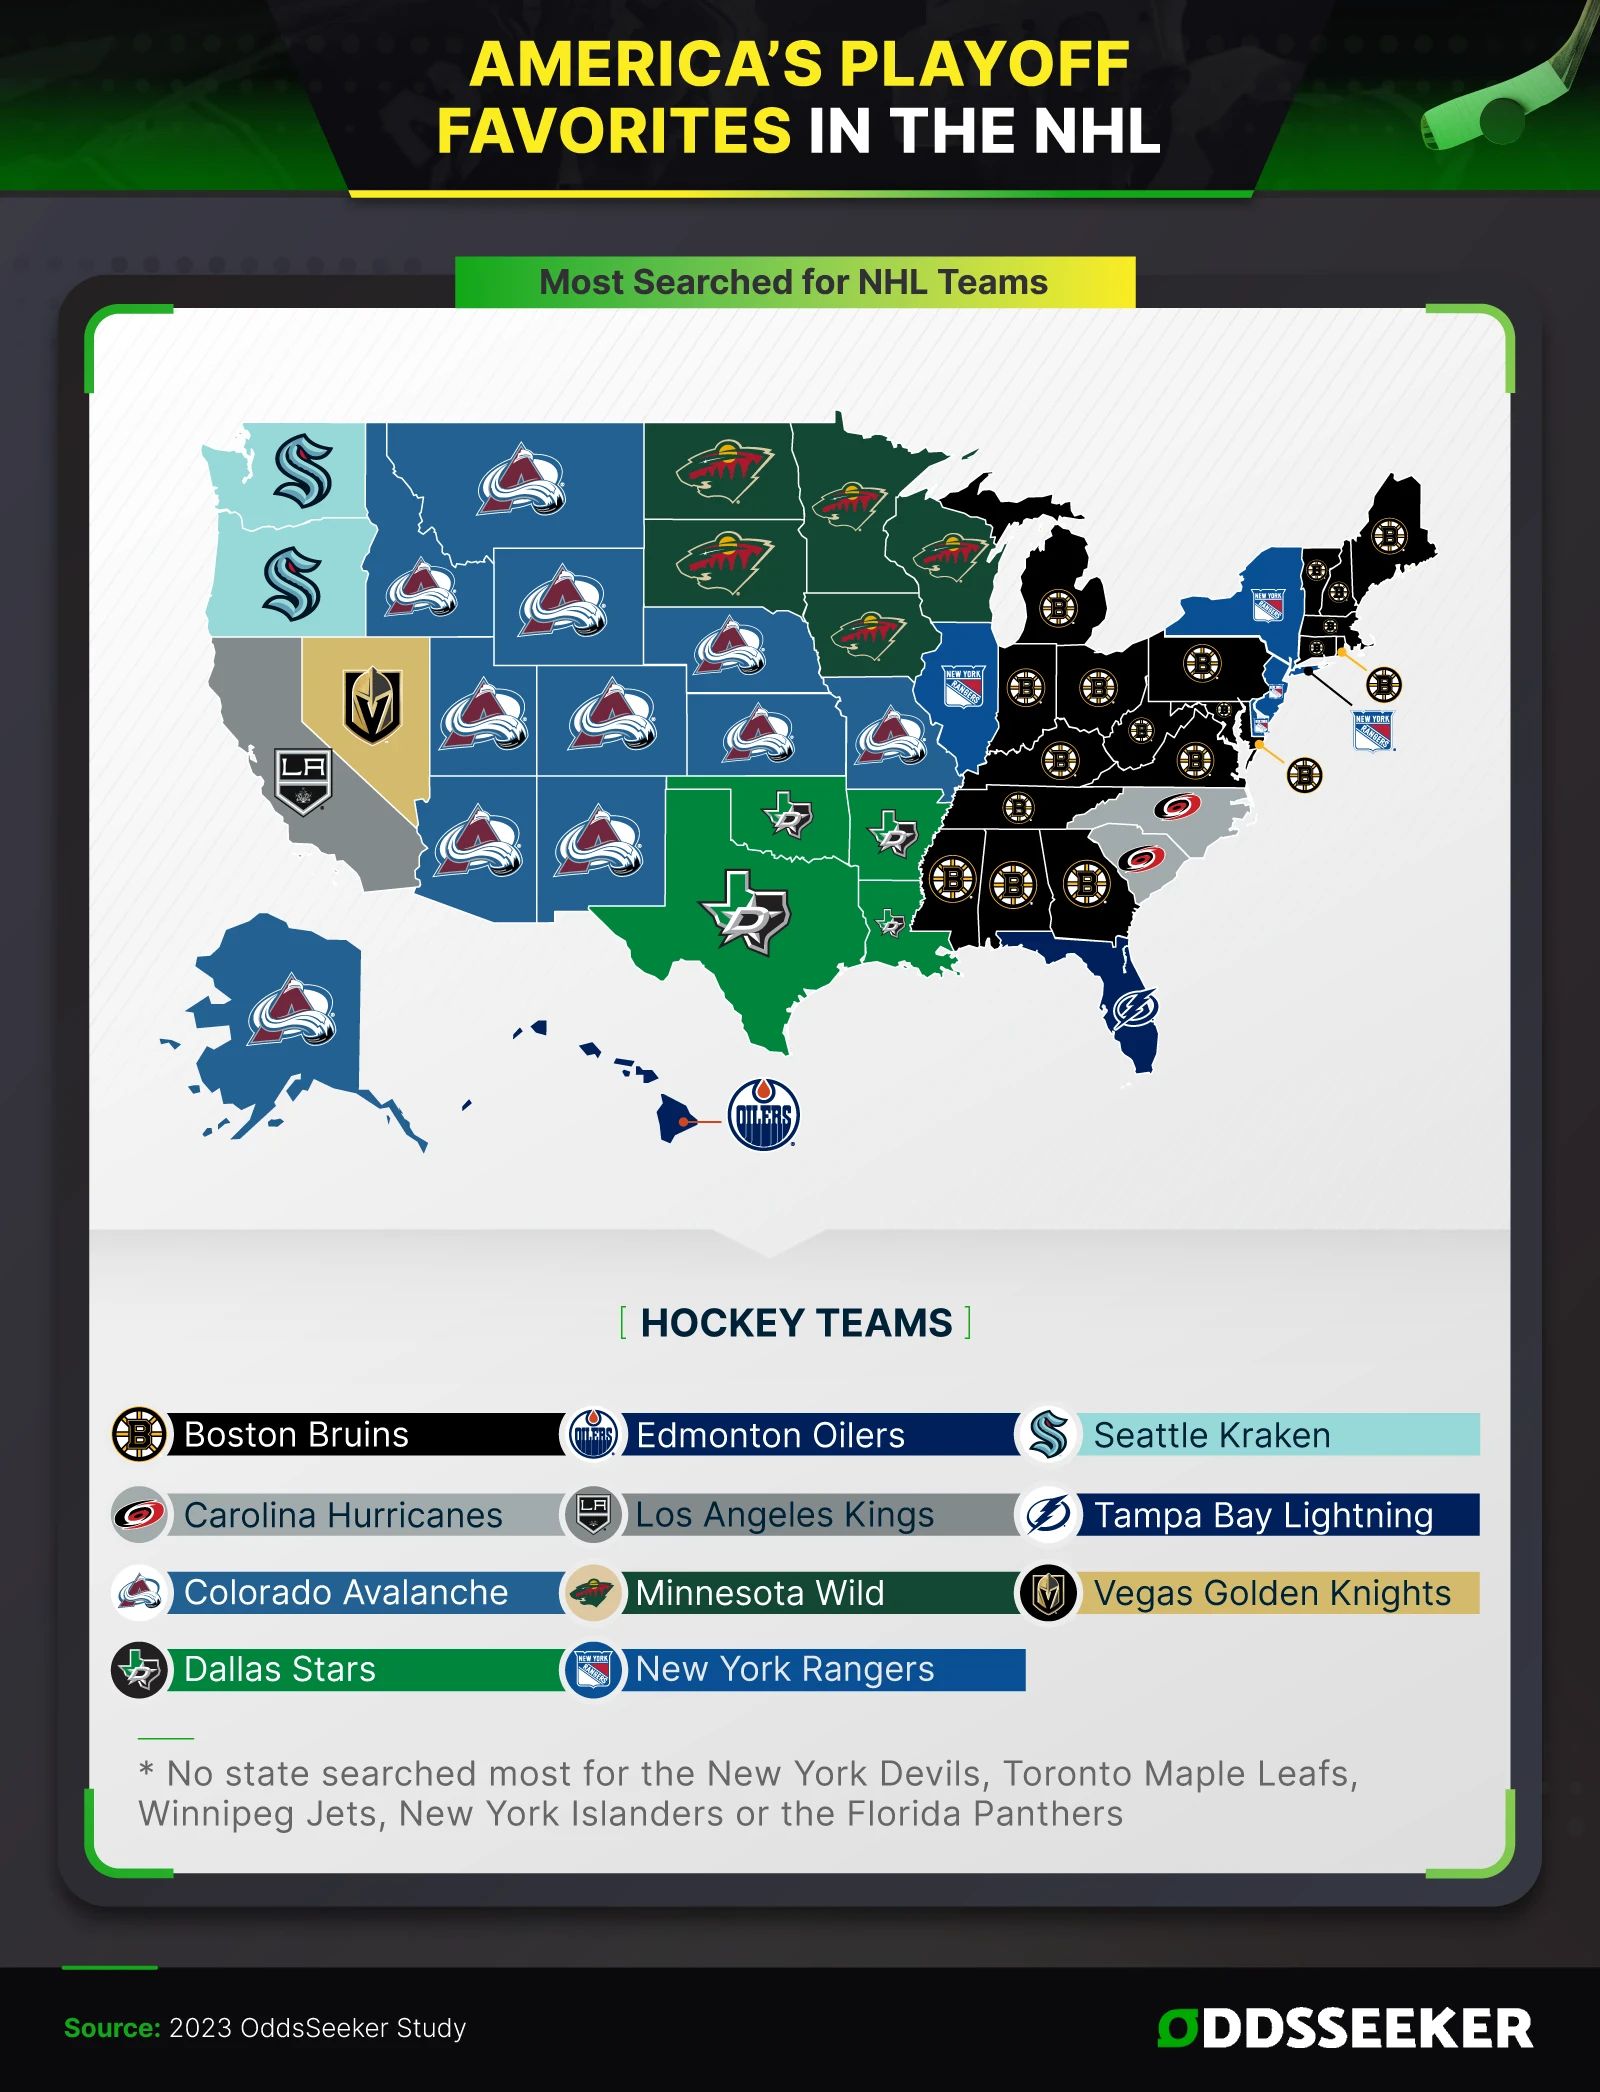 Infographic based on Google Search data showing the Most searched for teams in the NHL